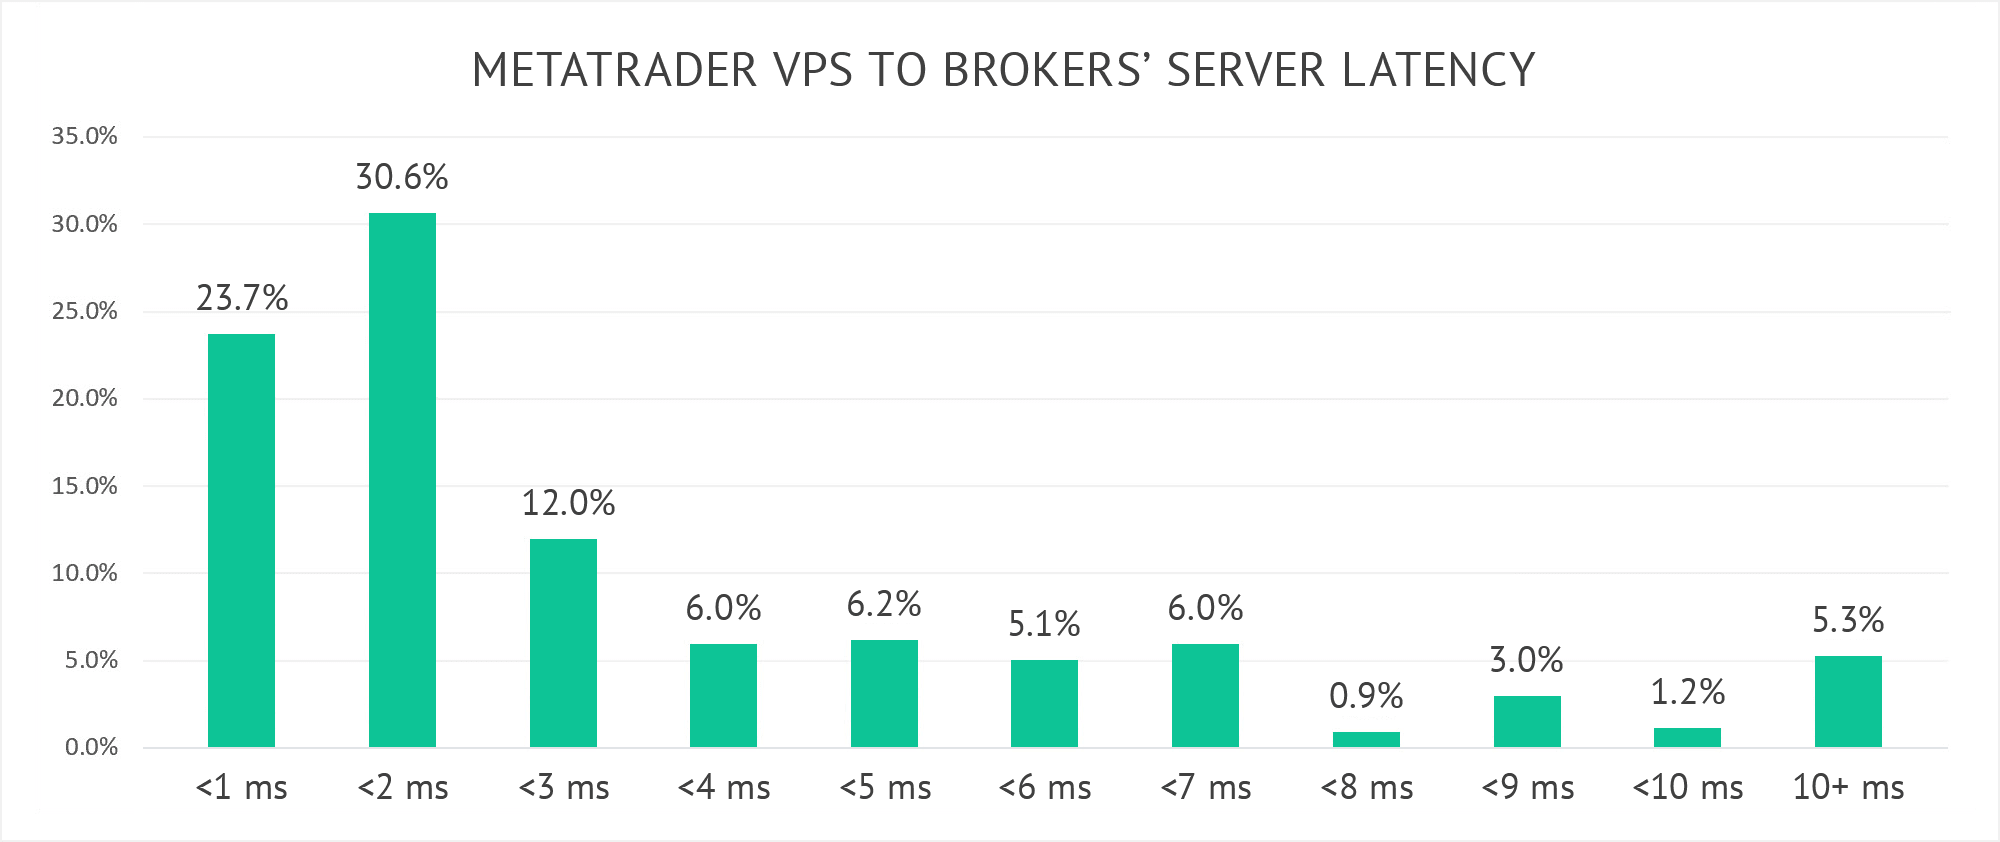 The current network latency provided by MetaTrader VPS is less than 5 milliseconds for connections to 80% of brokerage servers